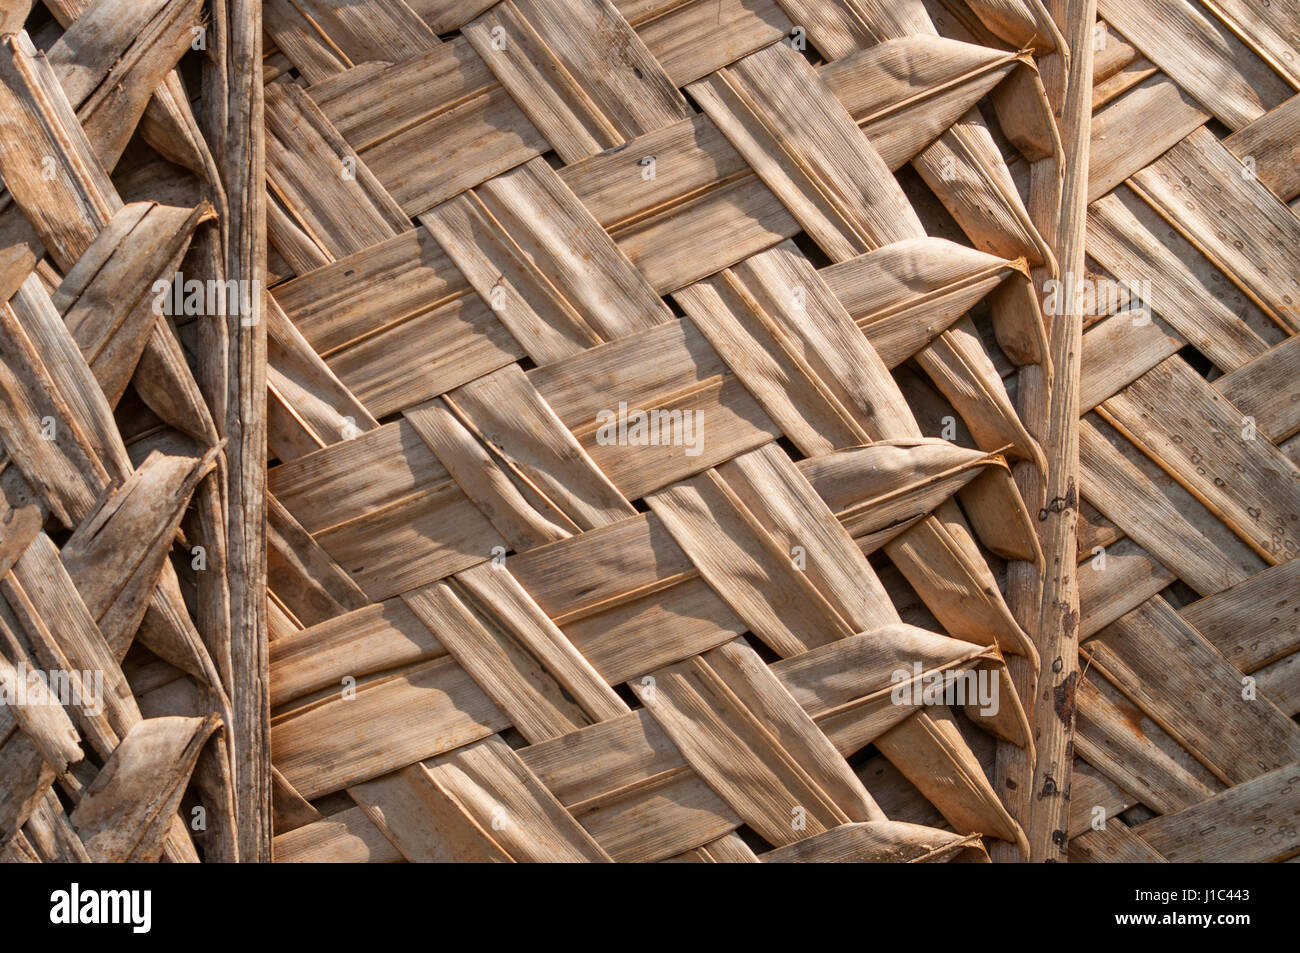 Primitive thatch of palm leaves in hot countries, twiggen wall or ceiling Stock Photo